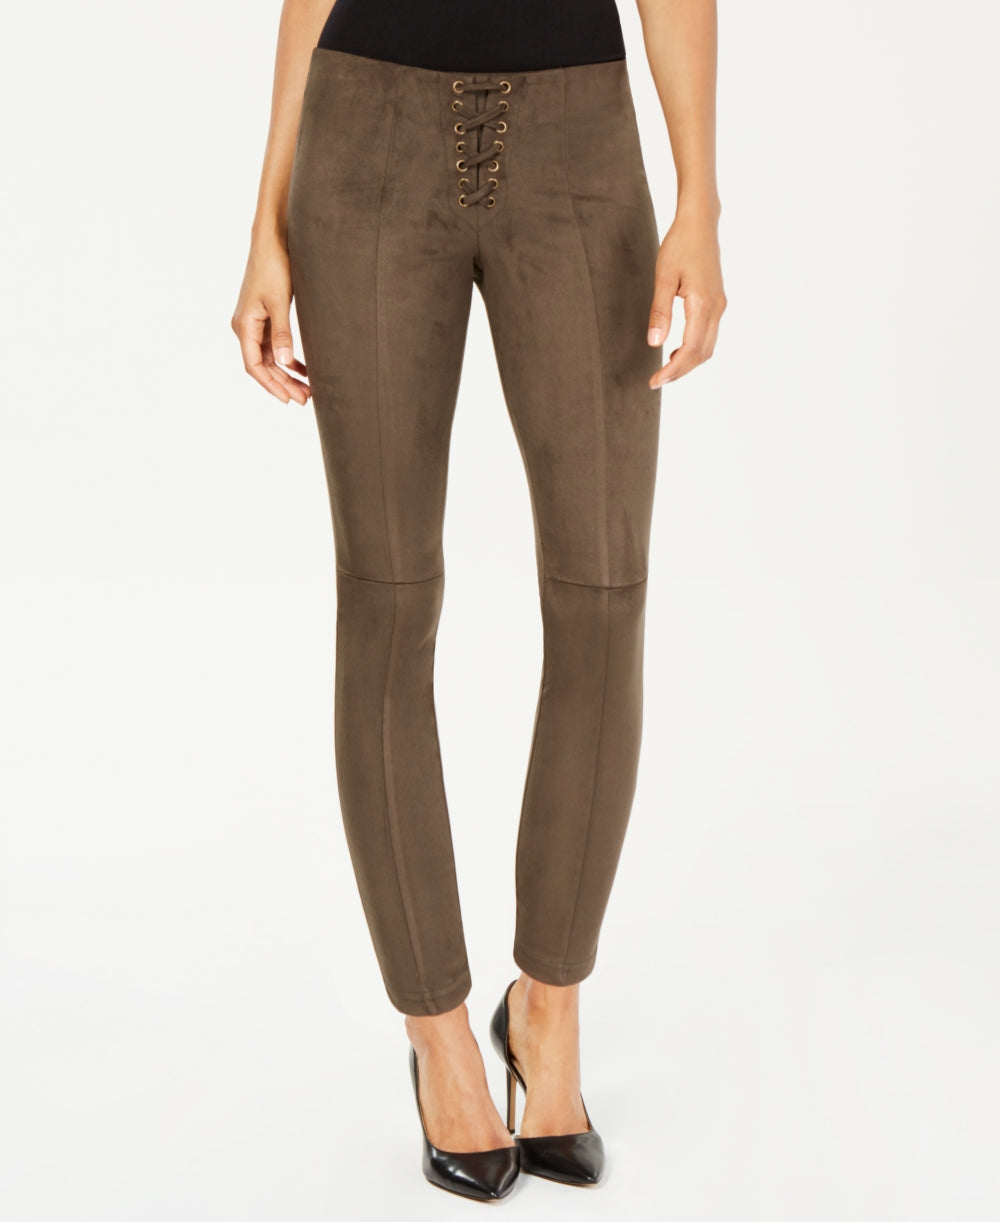 HUE Lace-Up Microsuede Skimmer Leggings (Cacao, Large)